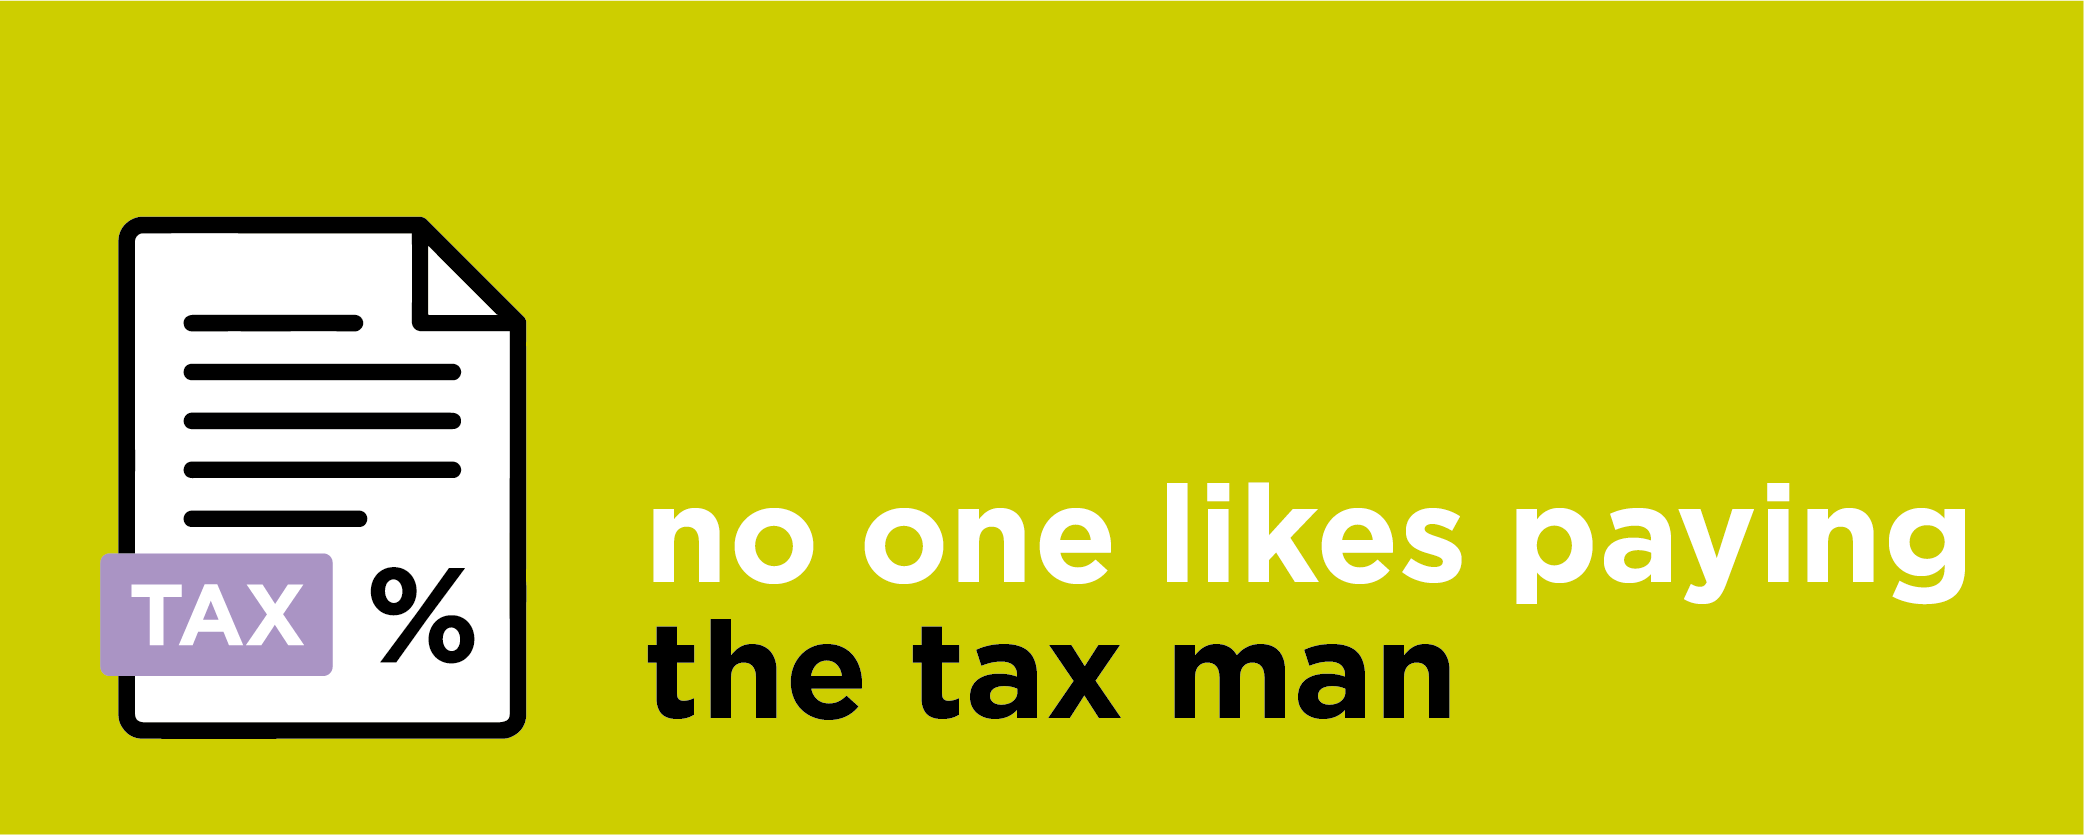 No one likes paying the tax man